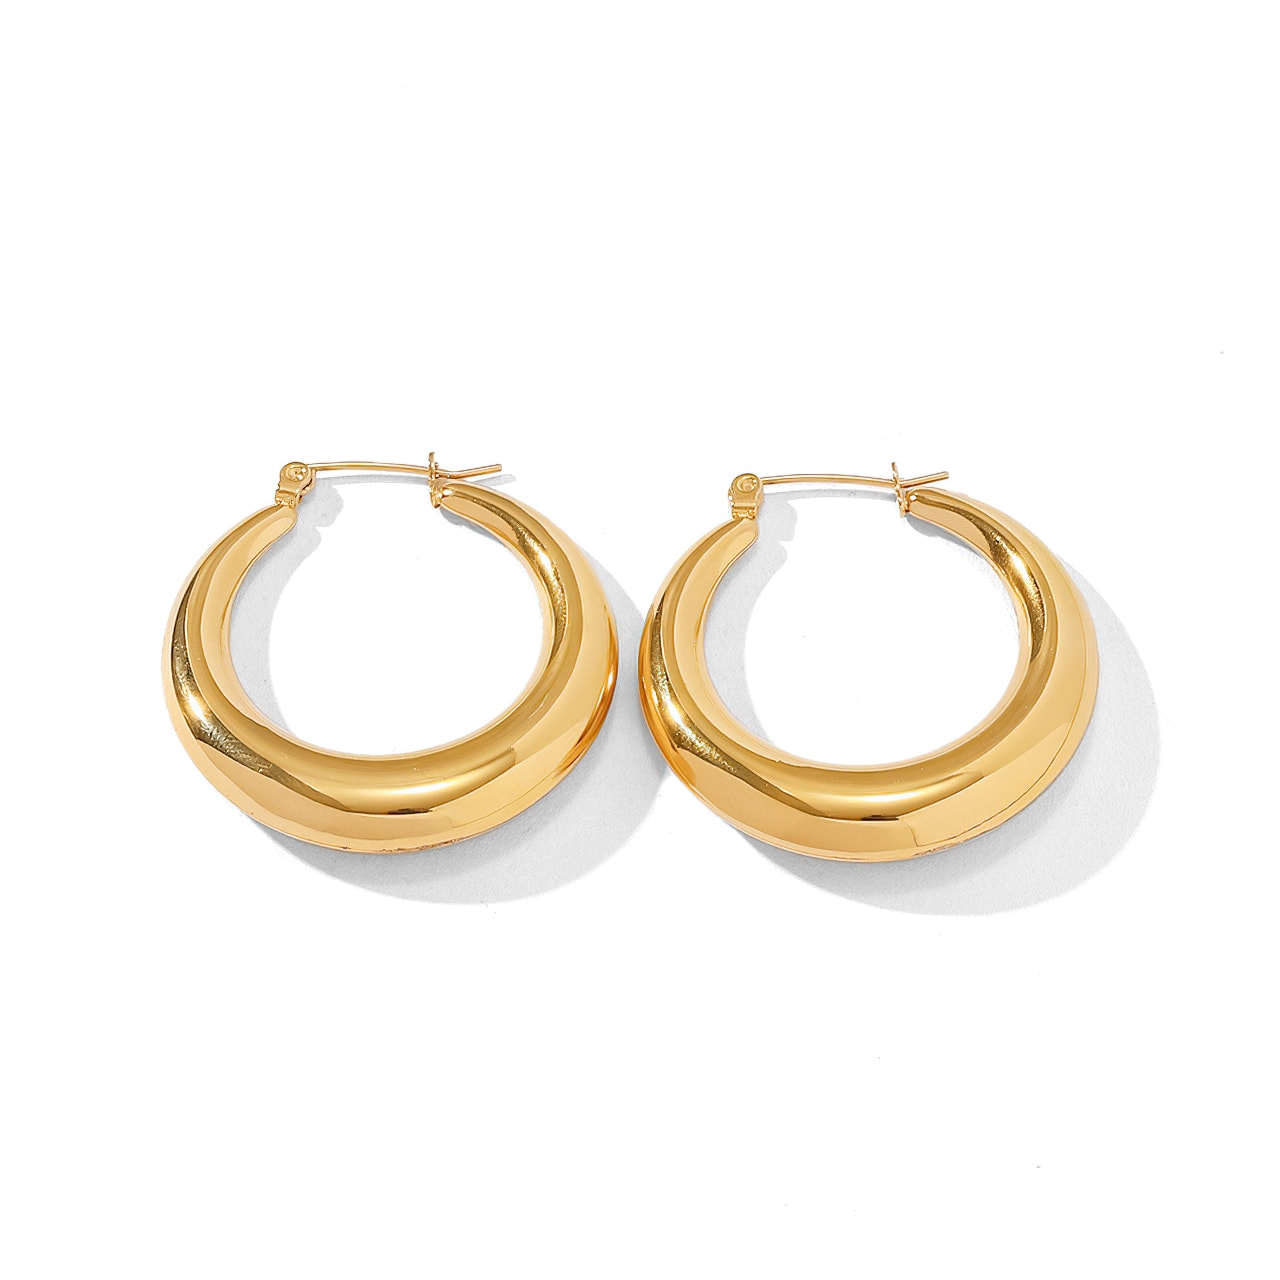 Minimalist Circular INS Style 18k Gold-Plated Earrings - MONICA